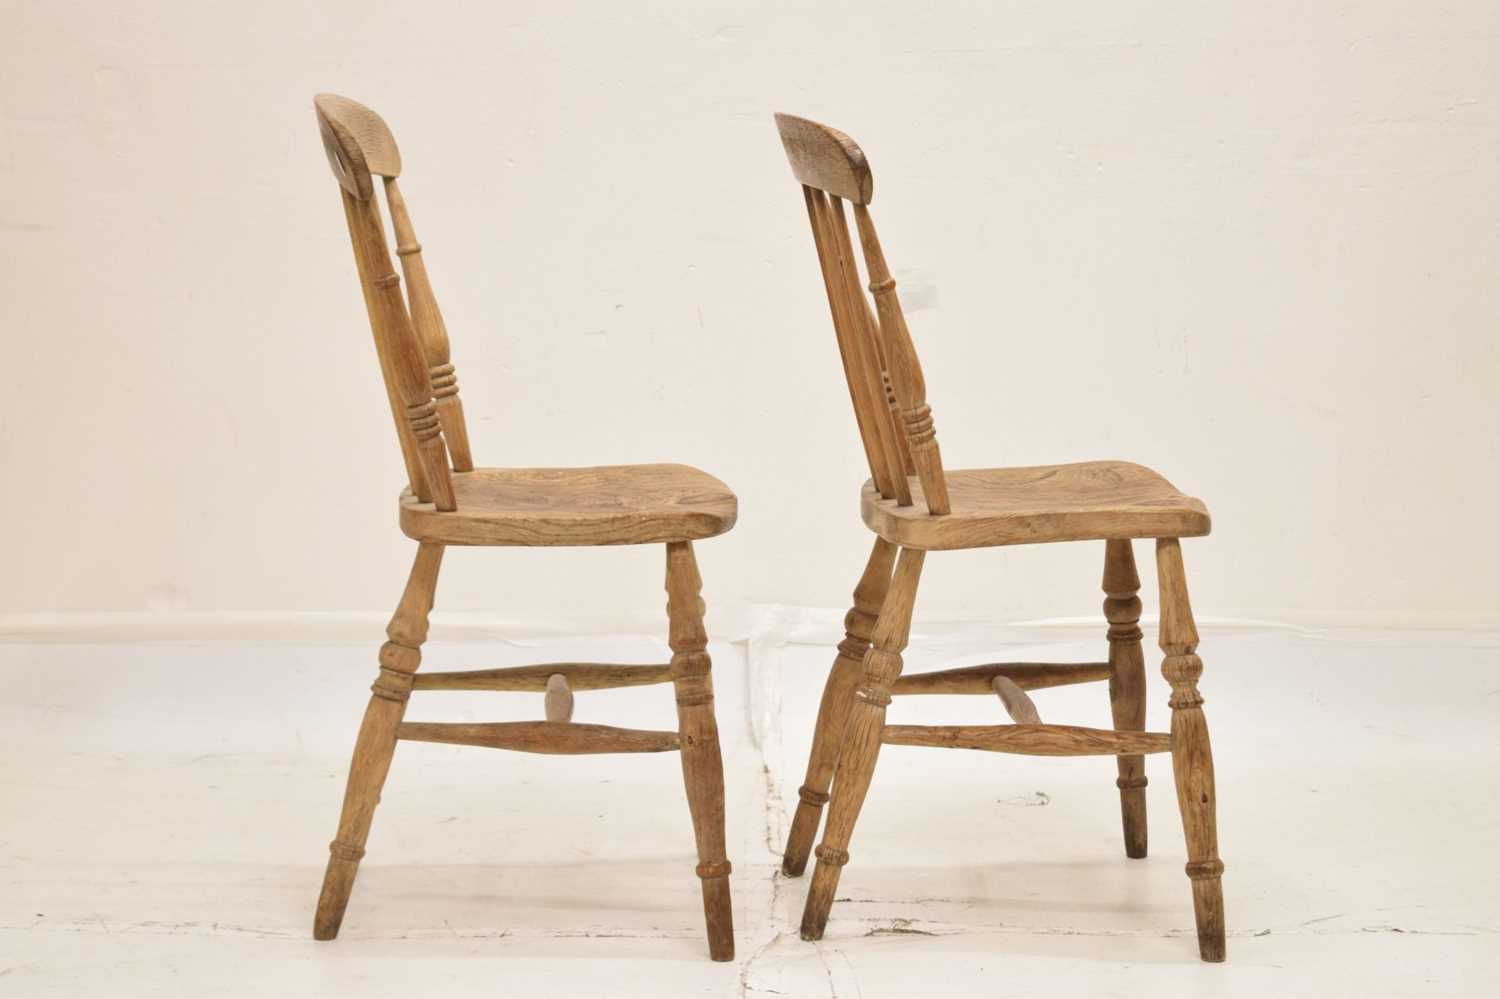 Pair of 19th century country stick back kitchen chairs - Image 5 of 8